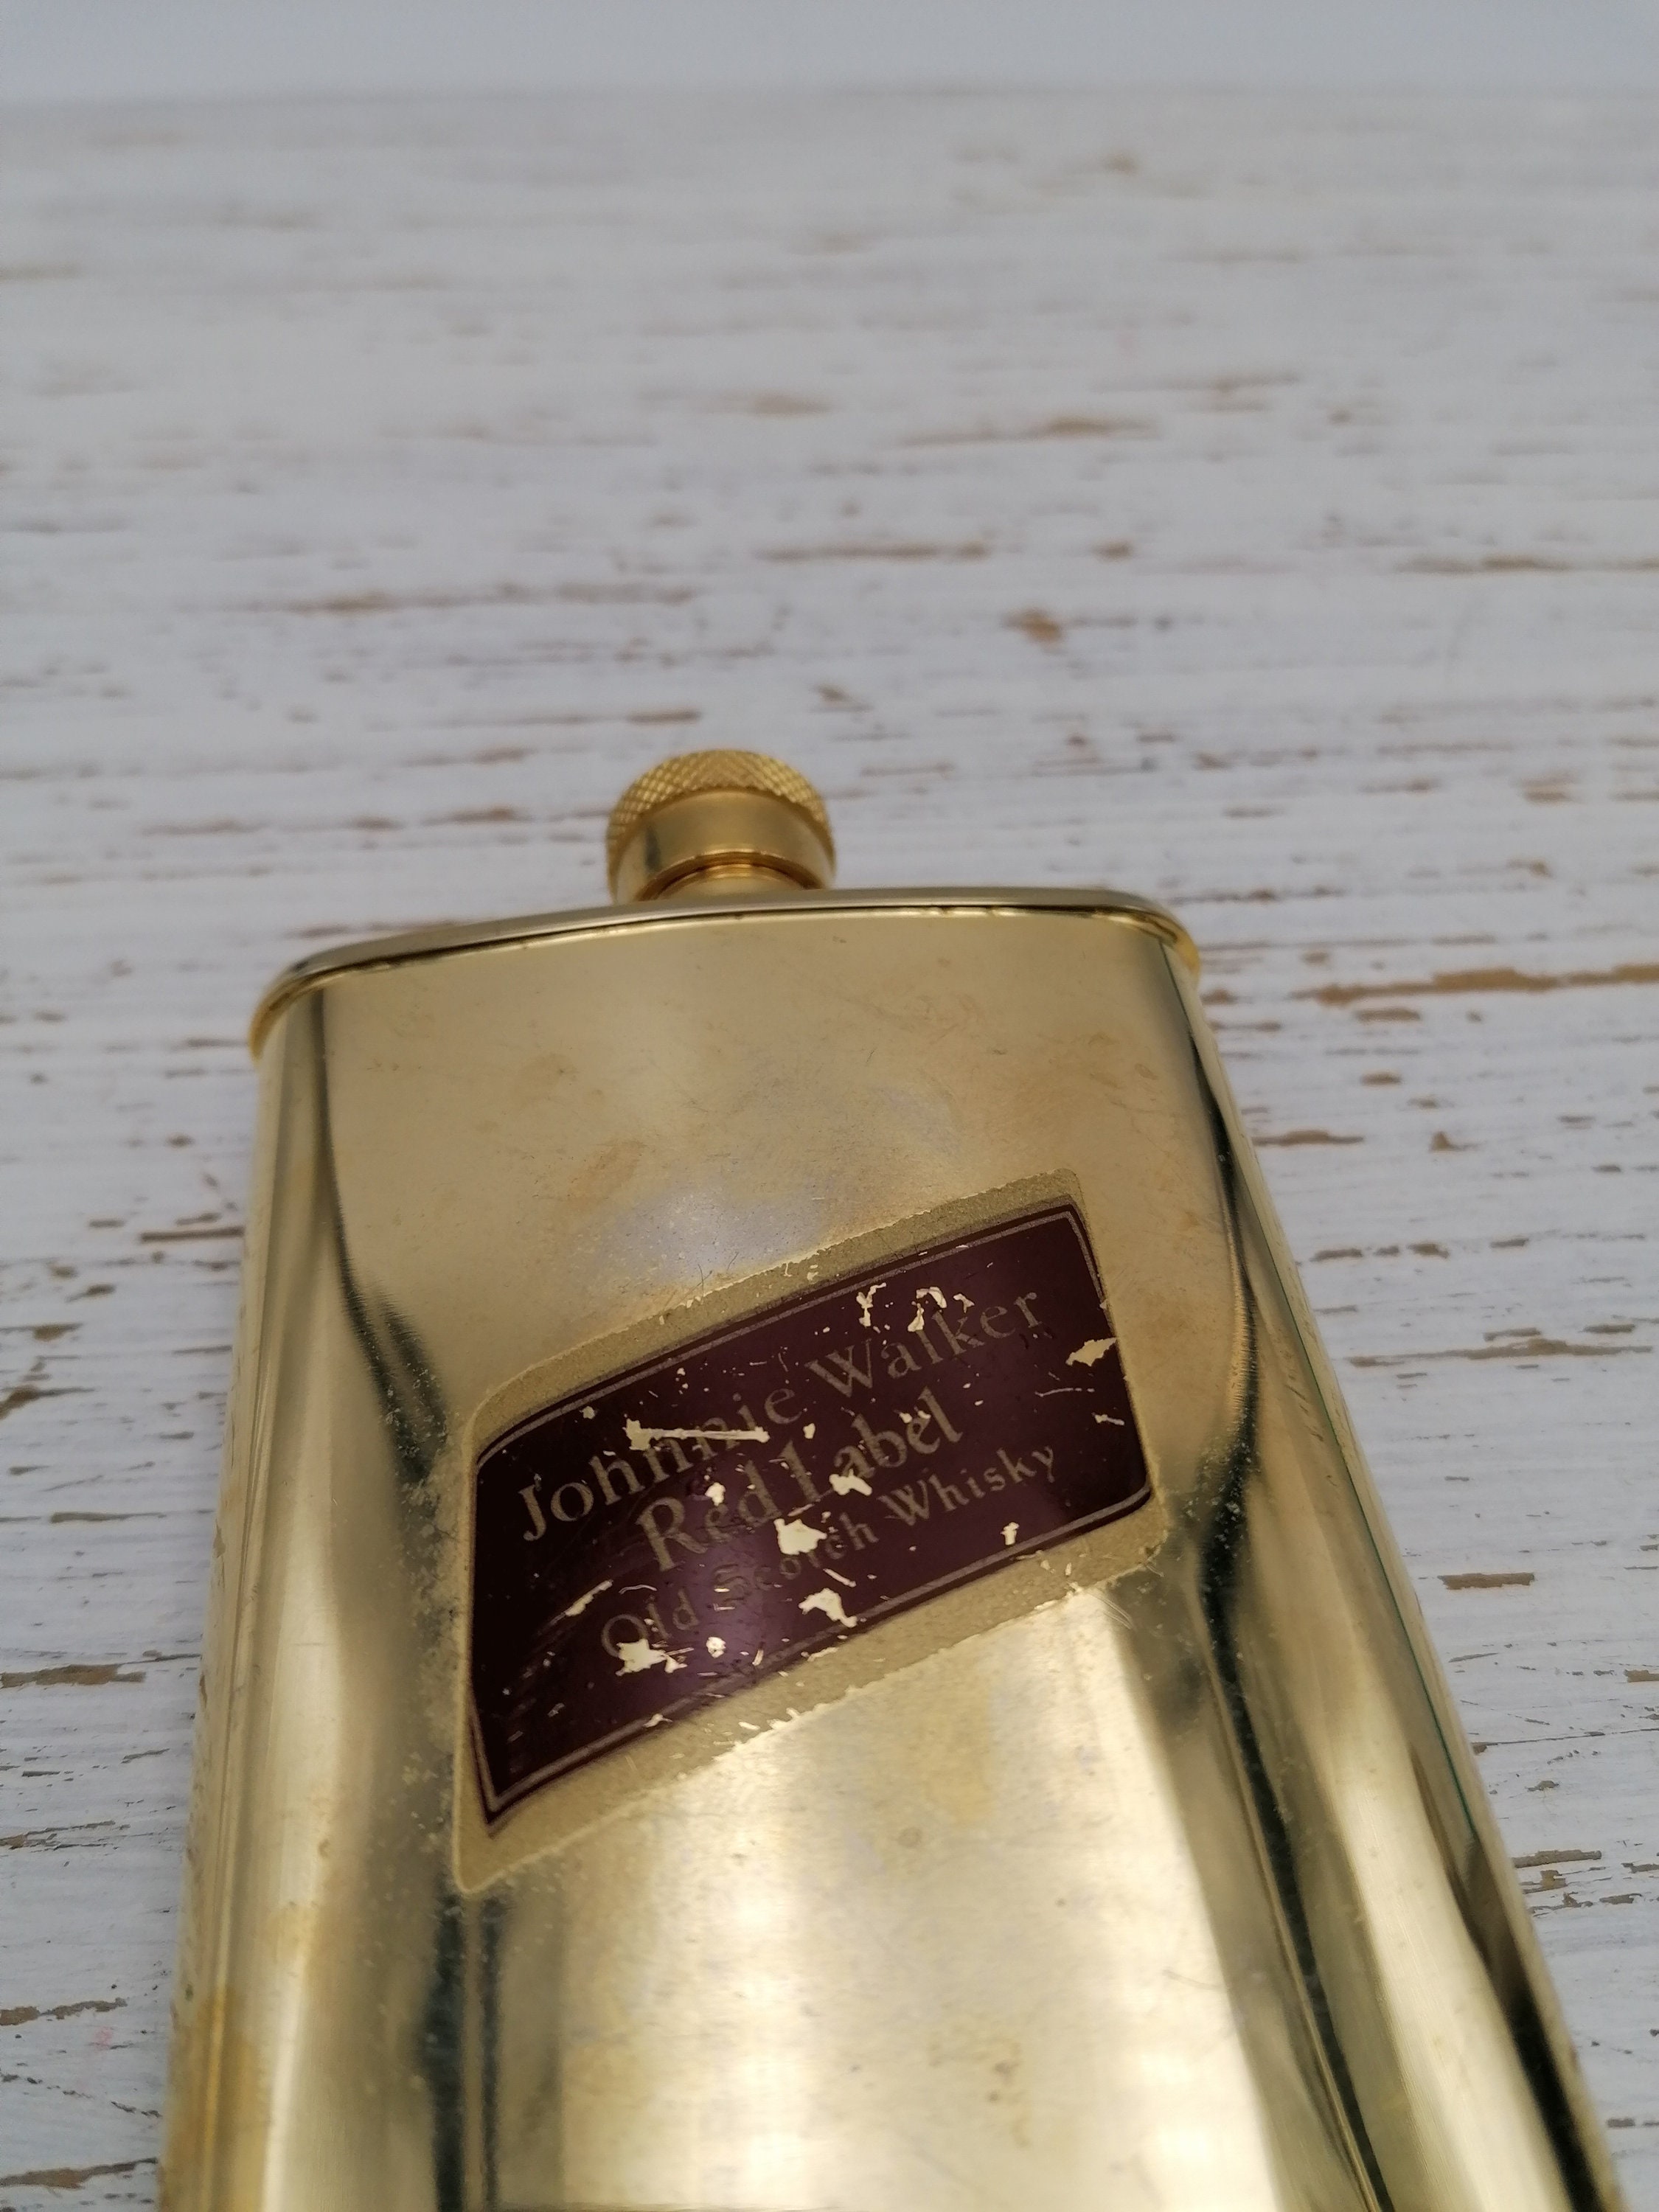 Pocket Metal Flask Whiskey Container Antique Metal Alcohol - Etsy UK